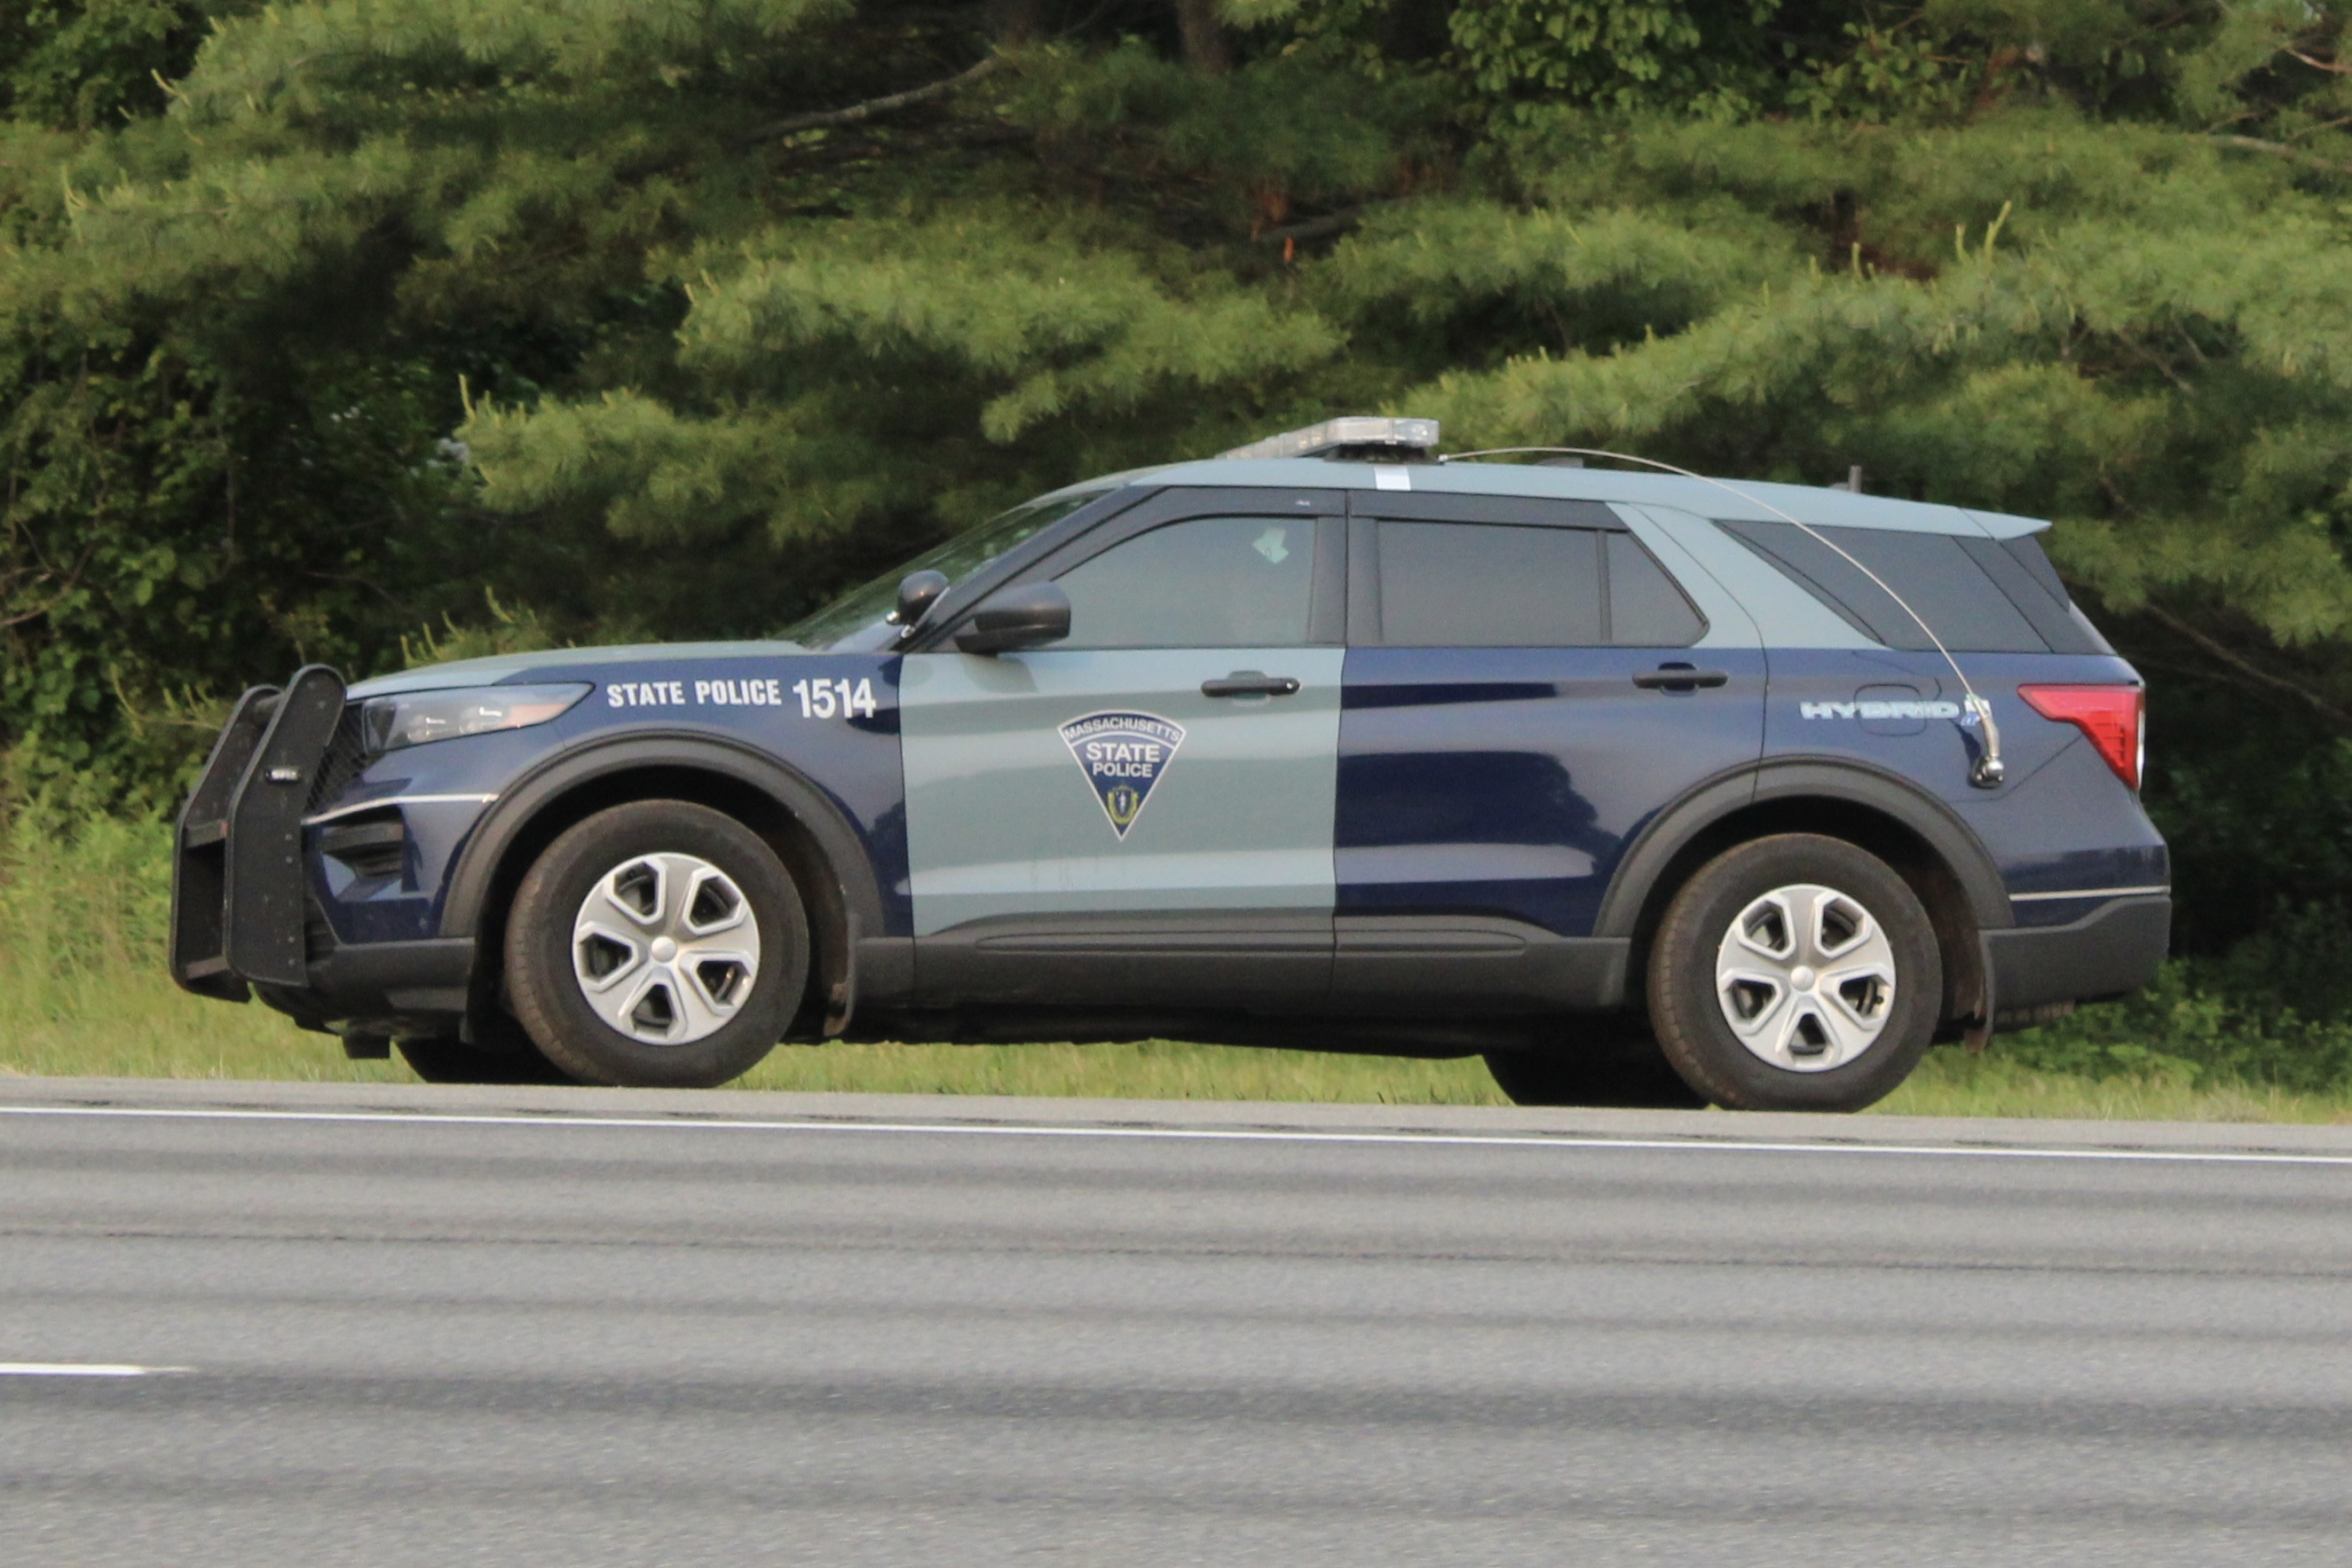 A photo  of Massachusetts State Police
            Cruiser 1514, a 2021 Ford Police Interceptor Utility Hybrid             taken by @riemergencyvehicles